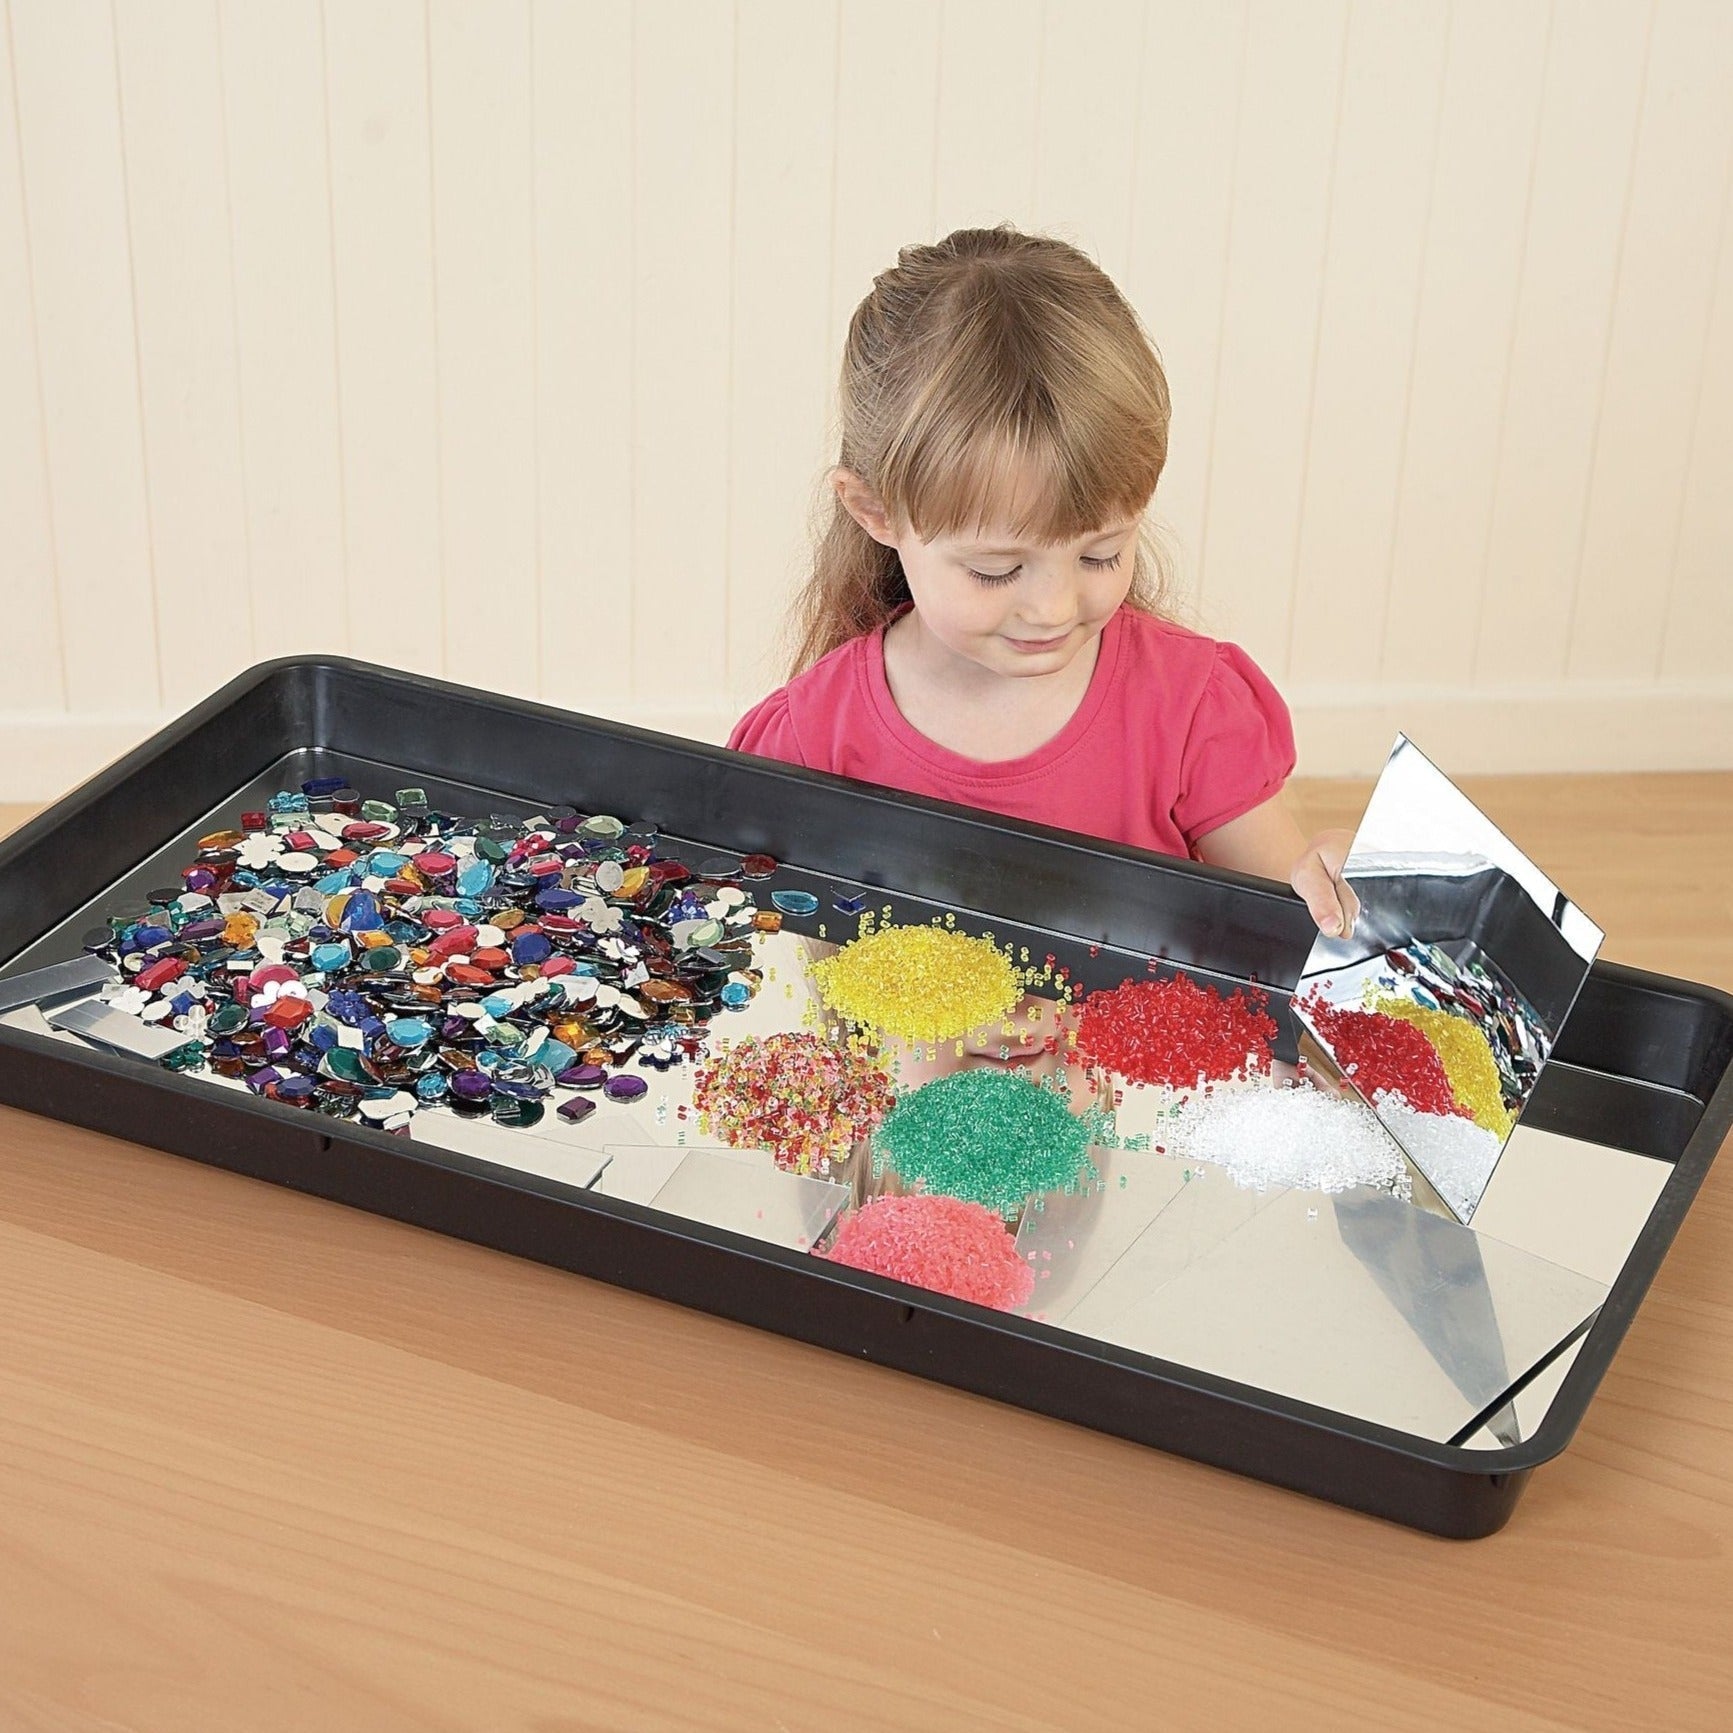 Jumbo Tray Rectangle, Meet your newest educational and recreational ally: the Versatile Sensory Tray. Crafted from durable rectangular plastic, this multi-purpose tray is the ideal companion for all types of messy play, be it indoors or outdoors. Its optimally-sized design makes it a perfect fit for table tops and low storage spaces, ensuring it's always close at hand for spontaneous fun. From channeling water to creating a makeshift sandpit or even an outdoor painting station, the potential activities are 